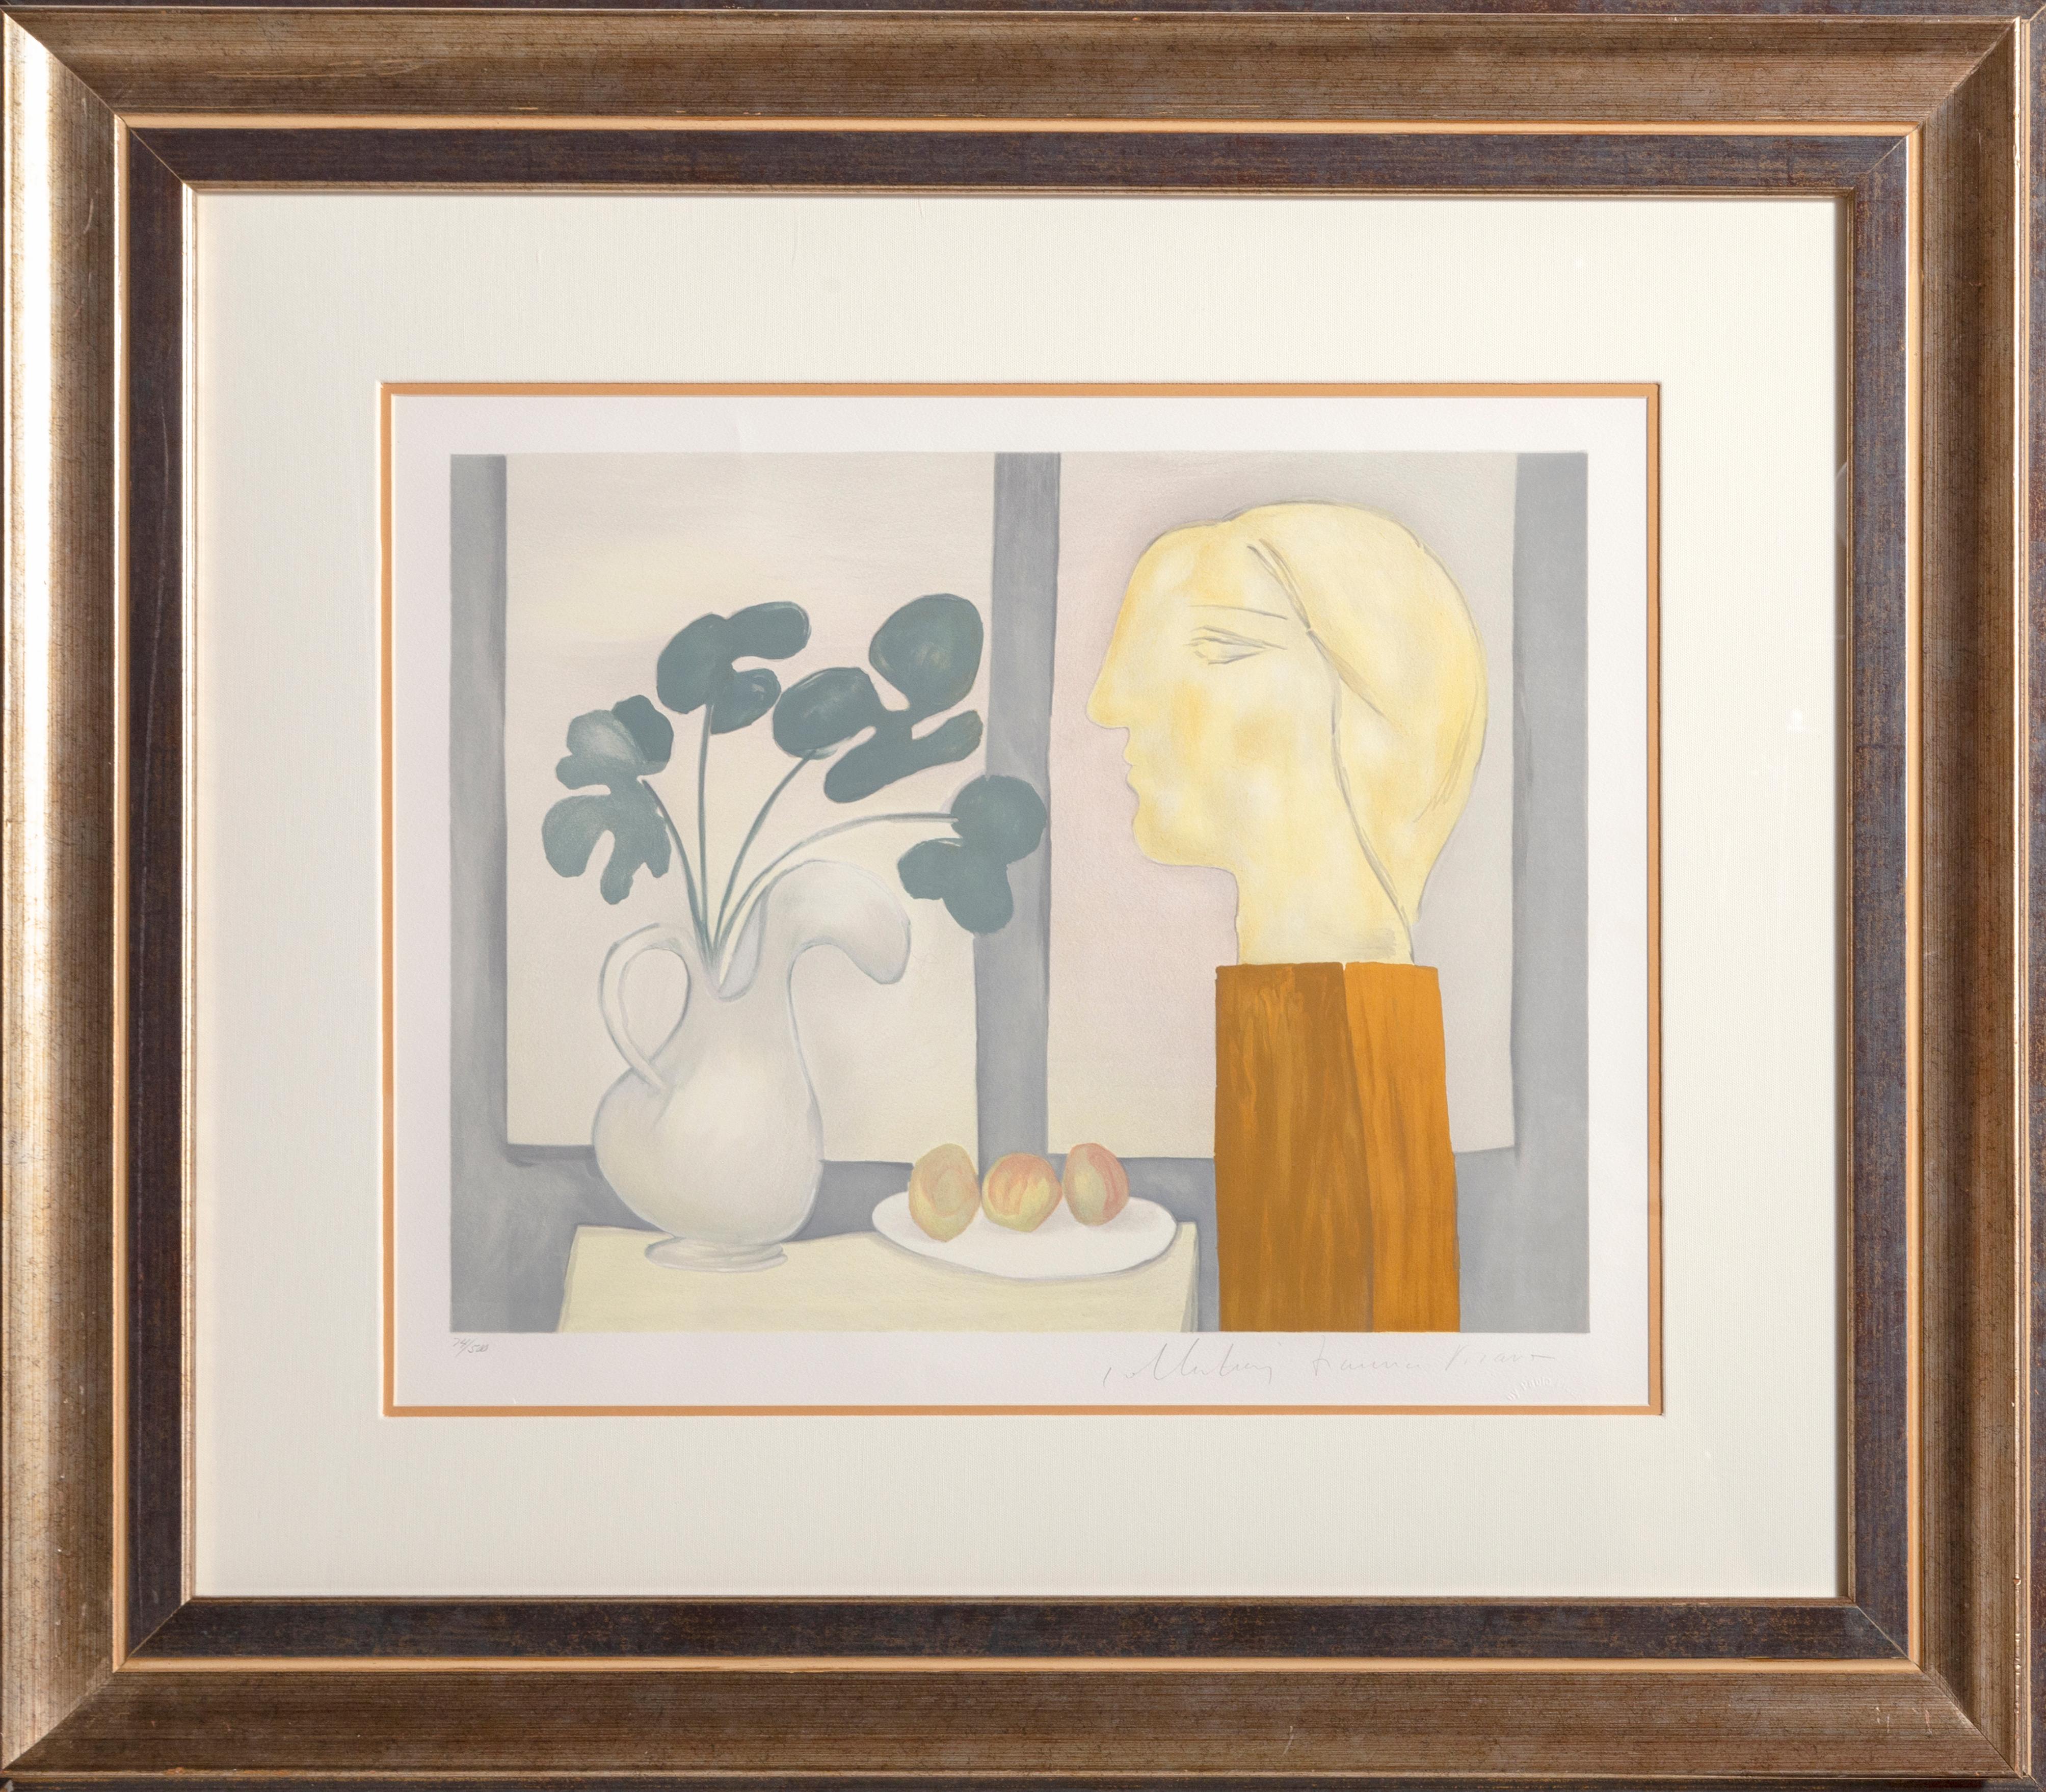 A lithograph from the Marina Picasso Estate Collection after the Pablo Picasso painting "Nature Morte a la Fenetre".  The original painting was completed in 1932. In the 1970's after Picasso's death, Marina Picasso, his granddaughter, authorized the